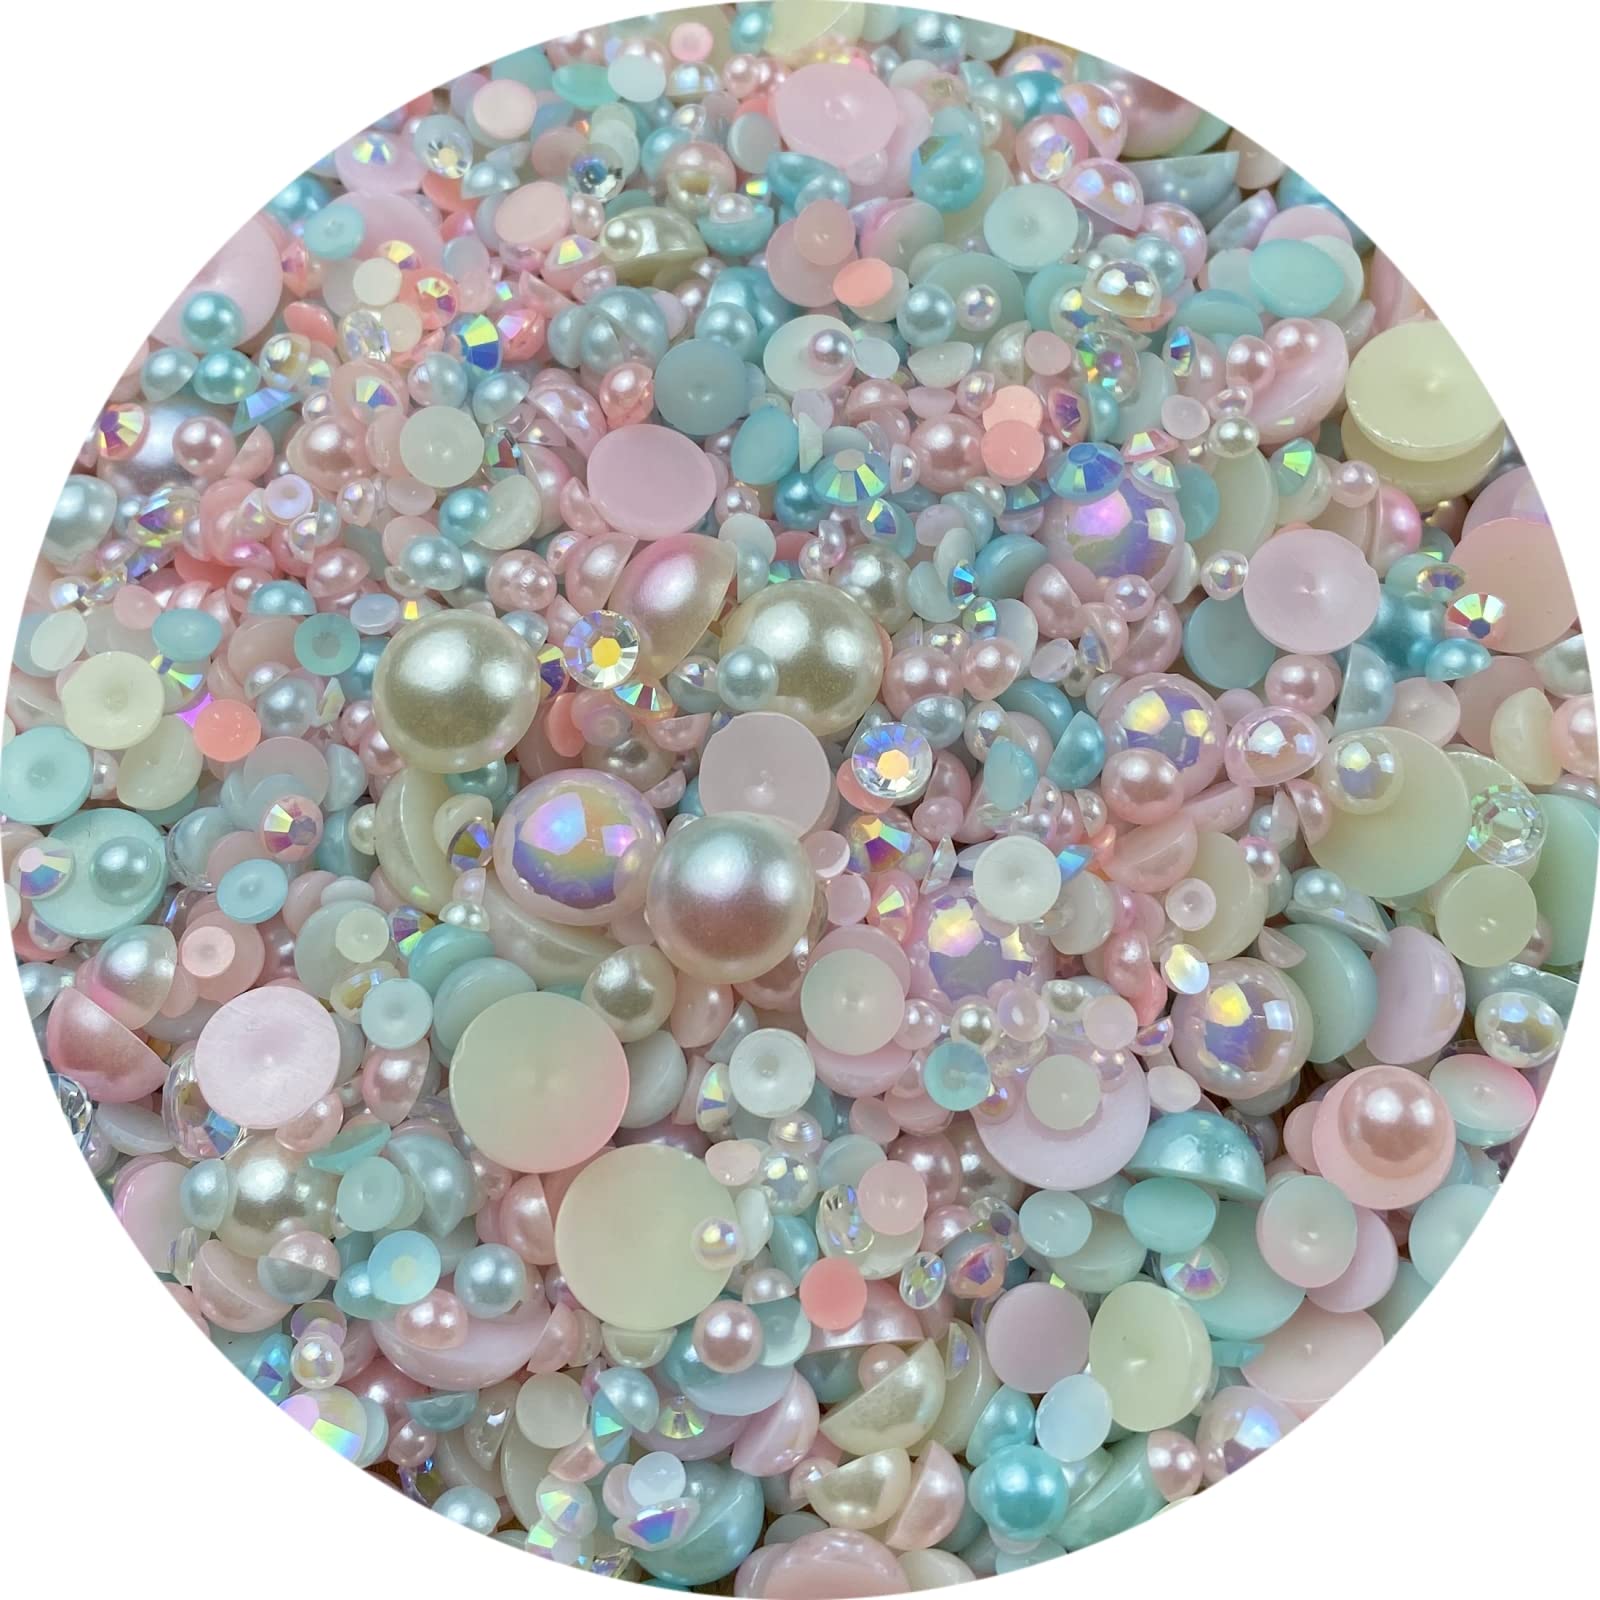 RODAKY 8500pcs Half Round Pearls for Crafts 6 Color AB Flatback Half Pearl 3/4/5/6mm ABS Imitation Pearls Loose Beads Rhinestones for Nails Art Design